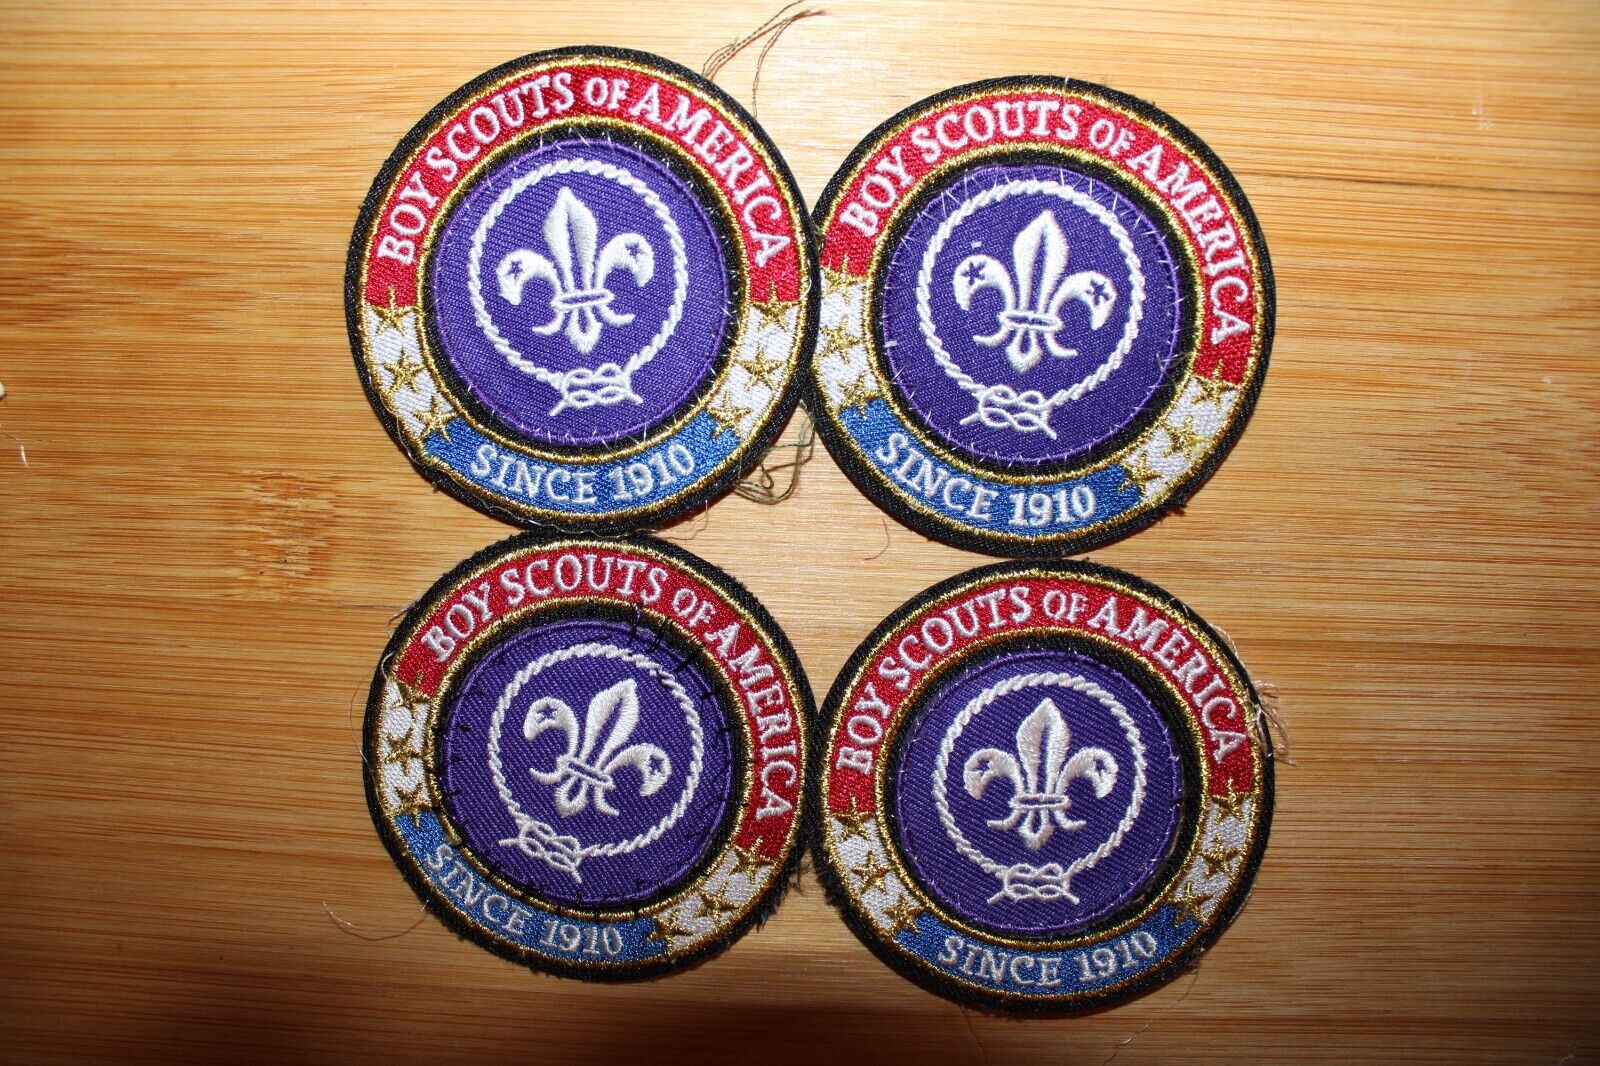 World Crest Emblem + ring - sewn Boy Scouts of America BSA Patches LOT OF 4 SETS